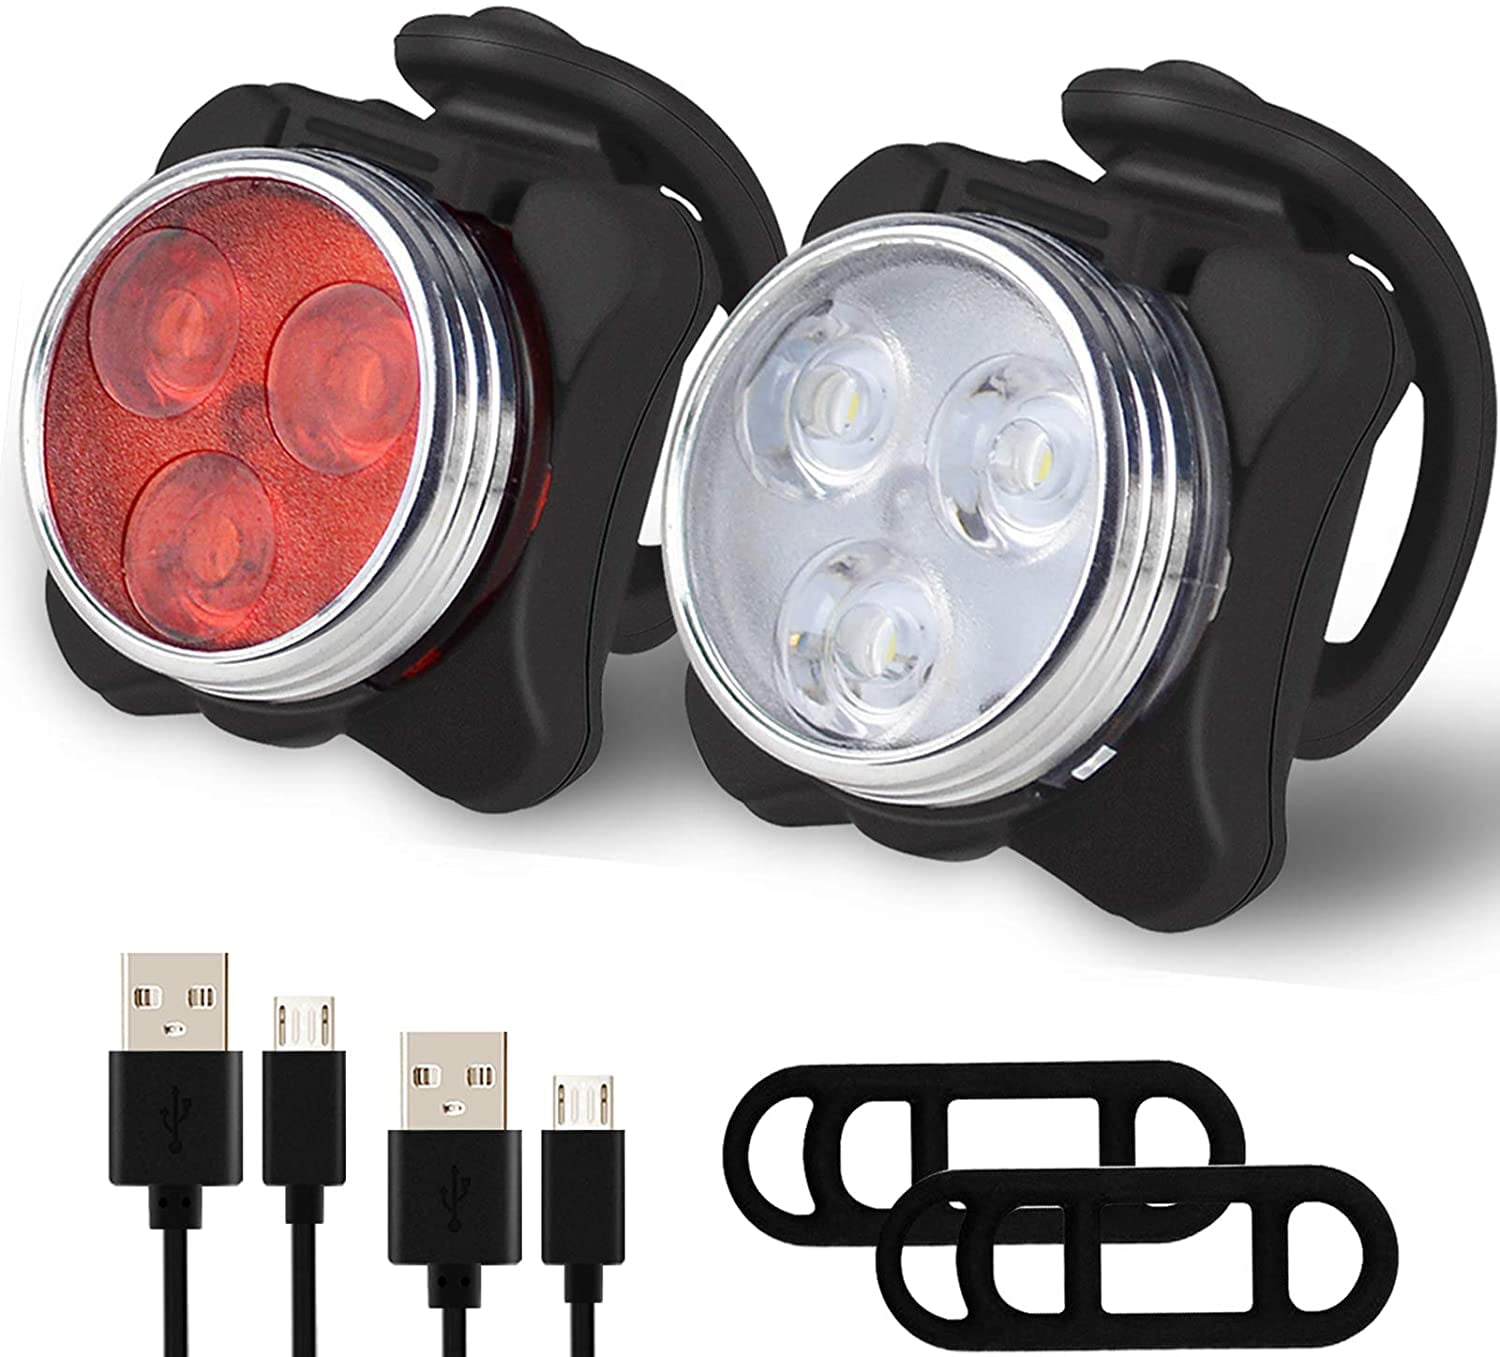 Rechargeable Bright LED Bike Lights Set Headlight Taillight Combinations LED 